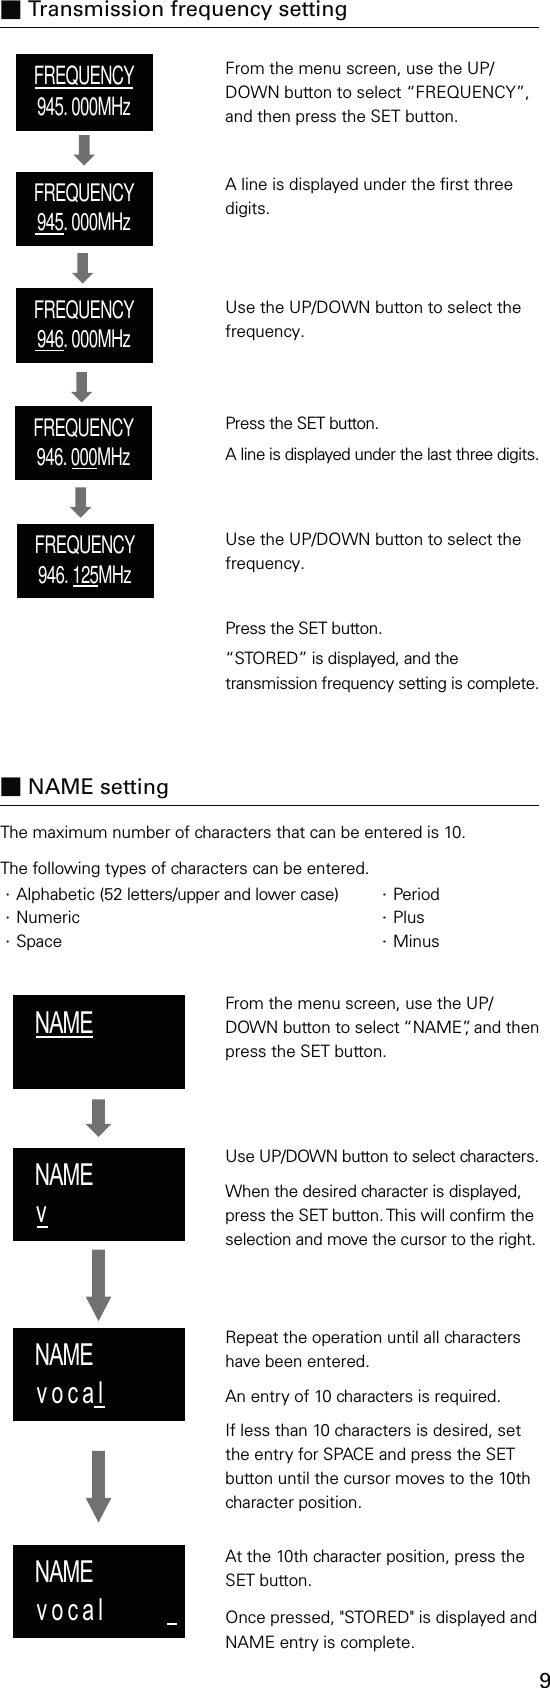 9From the menu screen, use the UP/DOWN button to select “FREQUENCY”, and then press the SET button.From the menu screen, use the UP/DOWN button to select “NAME”, and then press the SET button.A line is displayed under the rst three digits.Use UP/DOWN button to select characters.When the desired character is displayed, press the SET button. This will conrm the selection and move the cursor to the right.Use the UP/DOWN button to select the frequency.Repeat the operation until all characters have been entered.An entry of 10 characters is required.If less than 10 characters is desired, set the entry for SPACE and press the SET button until the cursor moves to the 10th character position.Use the UP/DOWN button to select the frequency.Press the SET button.A line is displayed under the last three digits.At the 10th character position, press the SET button.Once pressed, &quot;STORED&quot; is displayed and NAME entry is complete.Press the SET button.“STORED” is displayed, and the transmission frequency setting is complete.The maximum number of characters that can be entered is 10.The following types of characters can be entered.・Alphabetic (52 letters/upper and lower case) ・Period・Numeric ・Plus・Space ・MinusFREQUENCY945. 000MHzFREQUENCY945. 000MHzFREQUENCY946. 000MHzFREQUENCY946. 000MHzFREQUENCY946. 125MHzNAMENAMEvNAMEv o c a lNAMEv o c a l■ Transmission frequency setting■ NAME setting